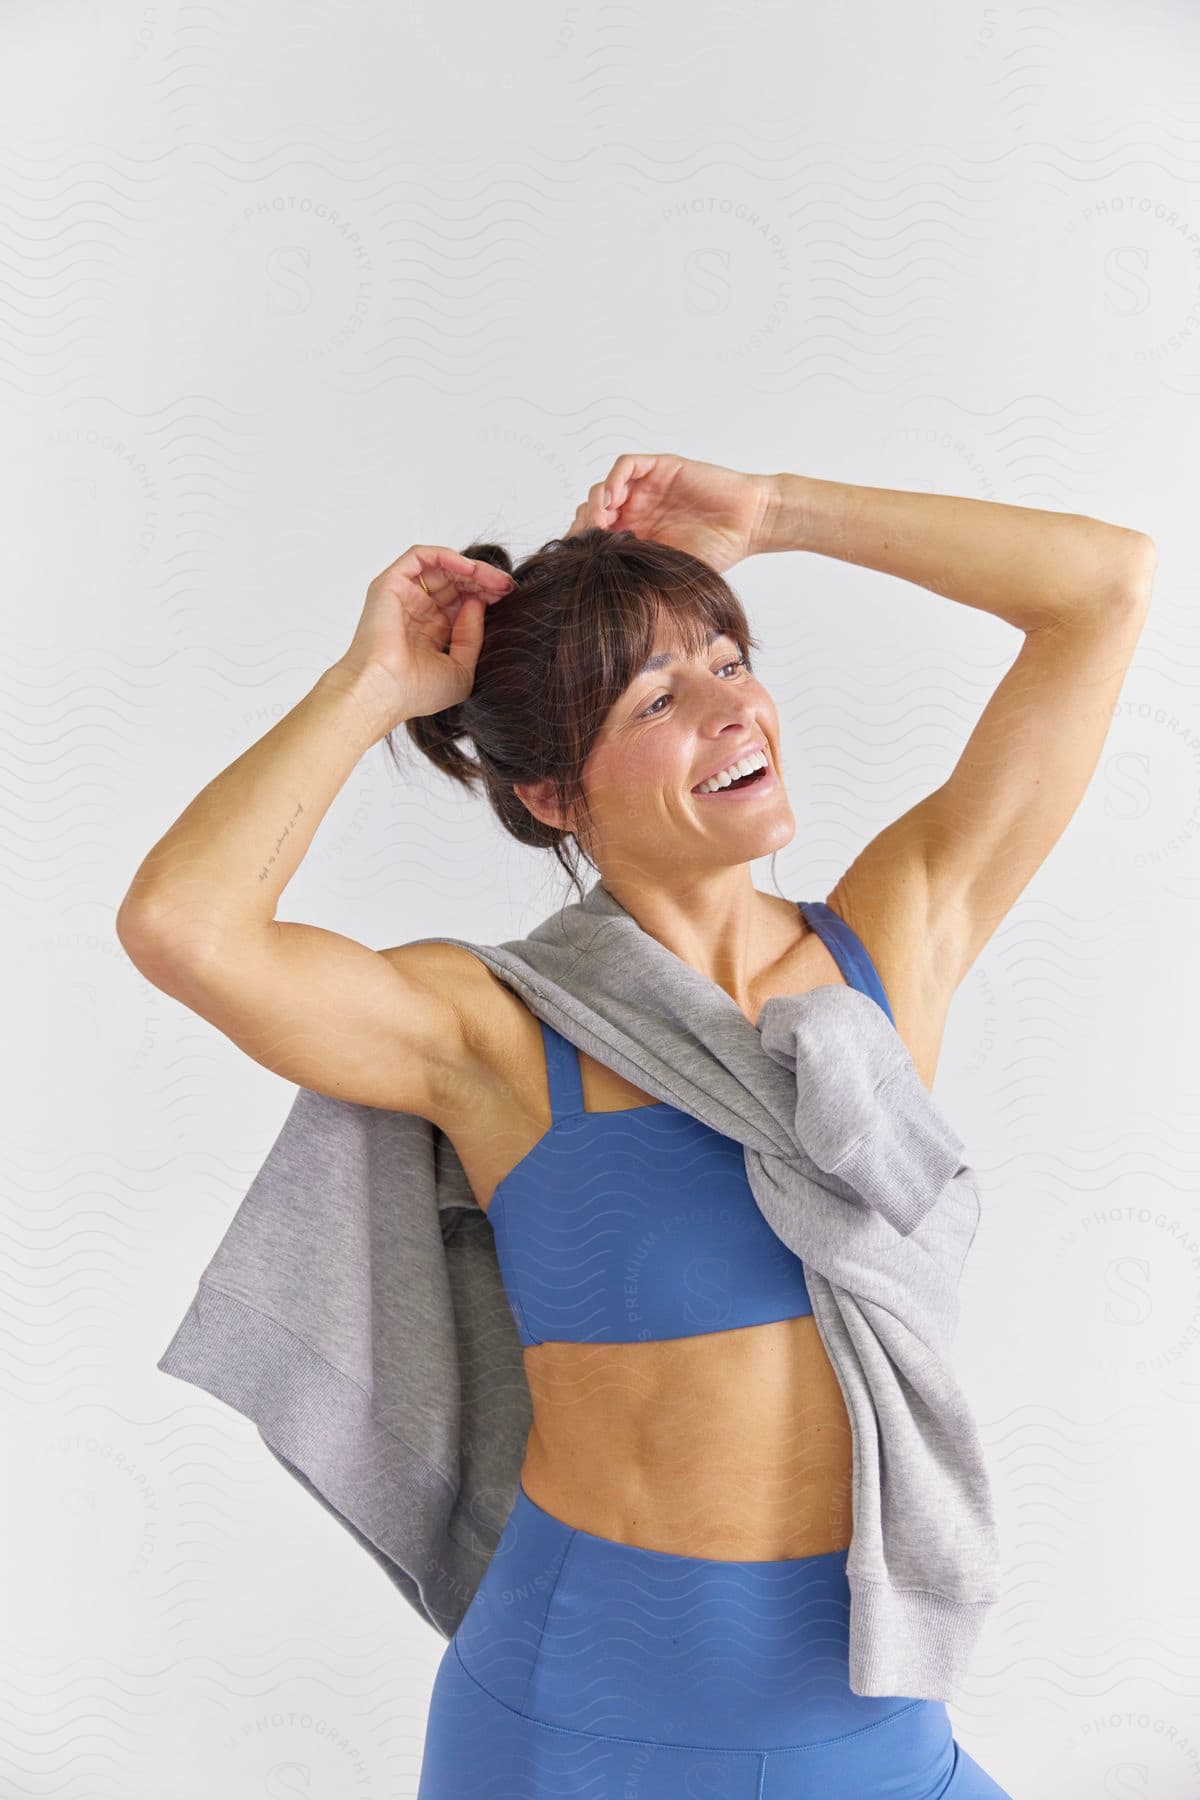 The woman is seen laughing with her hands resting on her head. She's draped in a cardigan, casually tied around her shoulders, and wearing a sleeveless top.